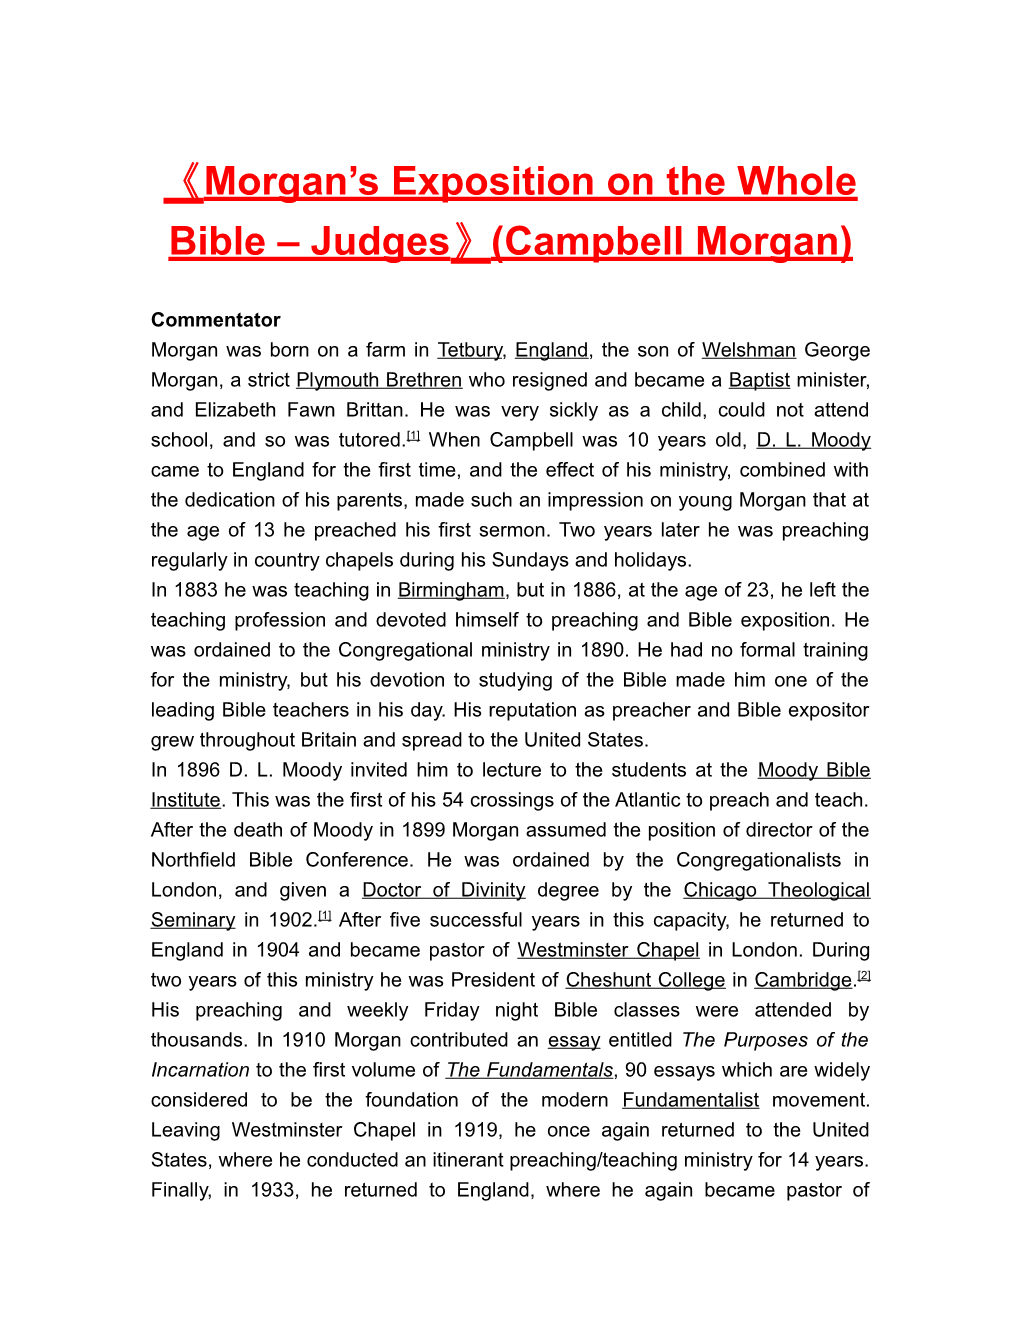 Morgan Sexposition on the Wholebible Judges (Campbell Morgan)